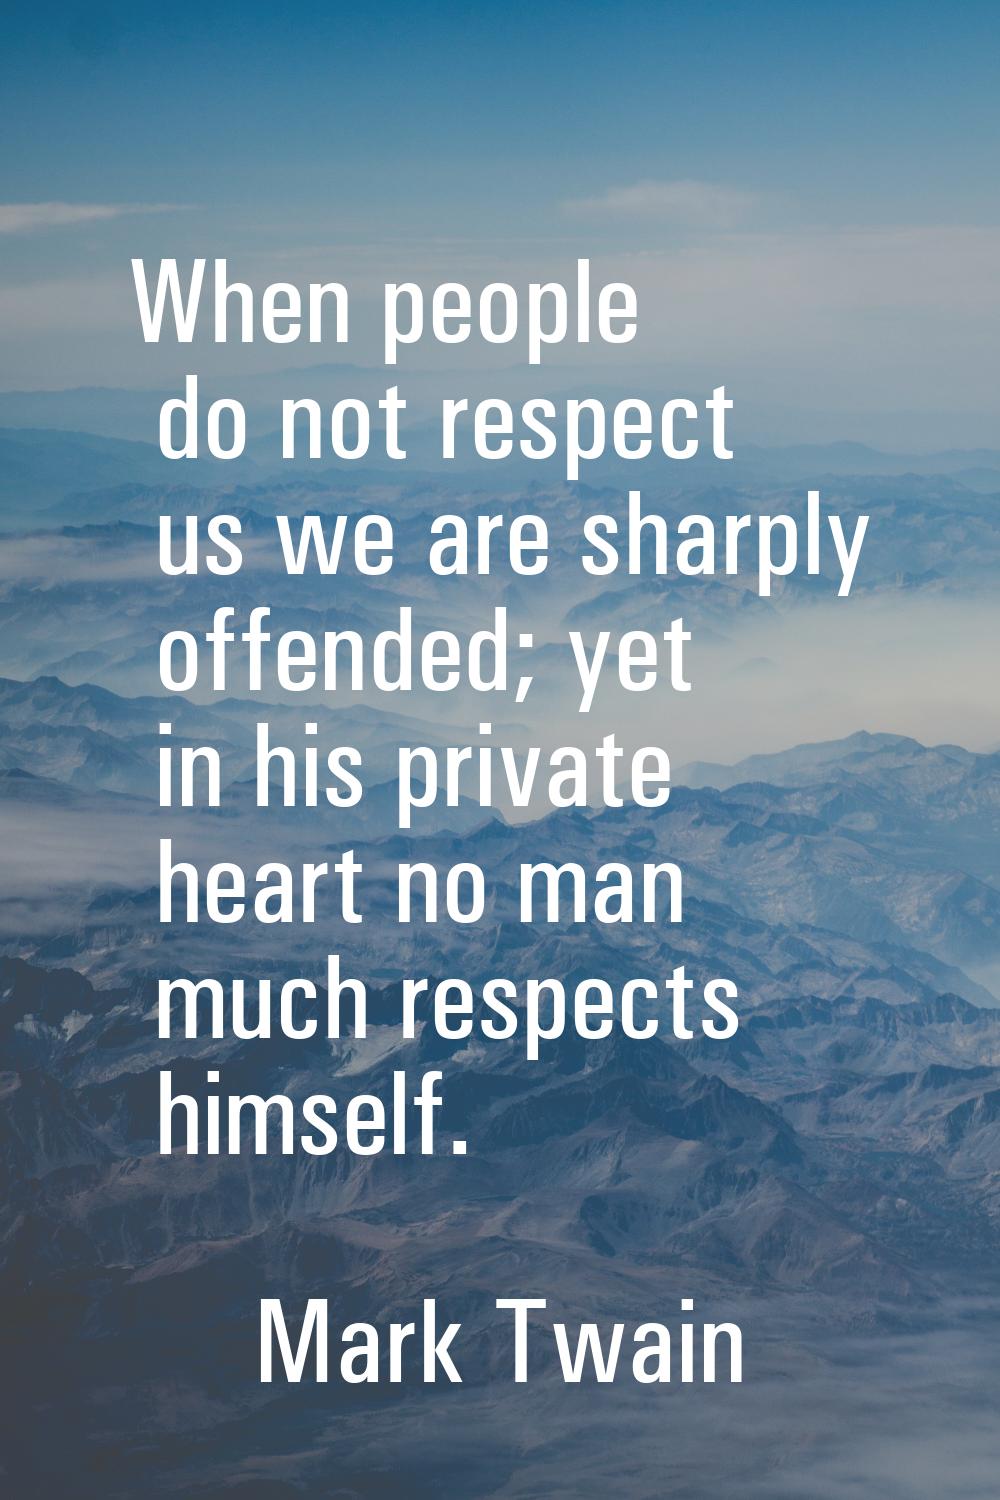 When people do not respect us we are sharply offended; yet in his private heart no man much respect